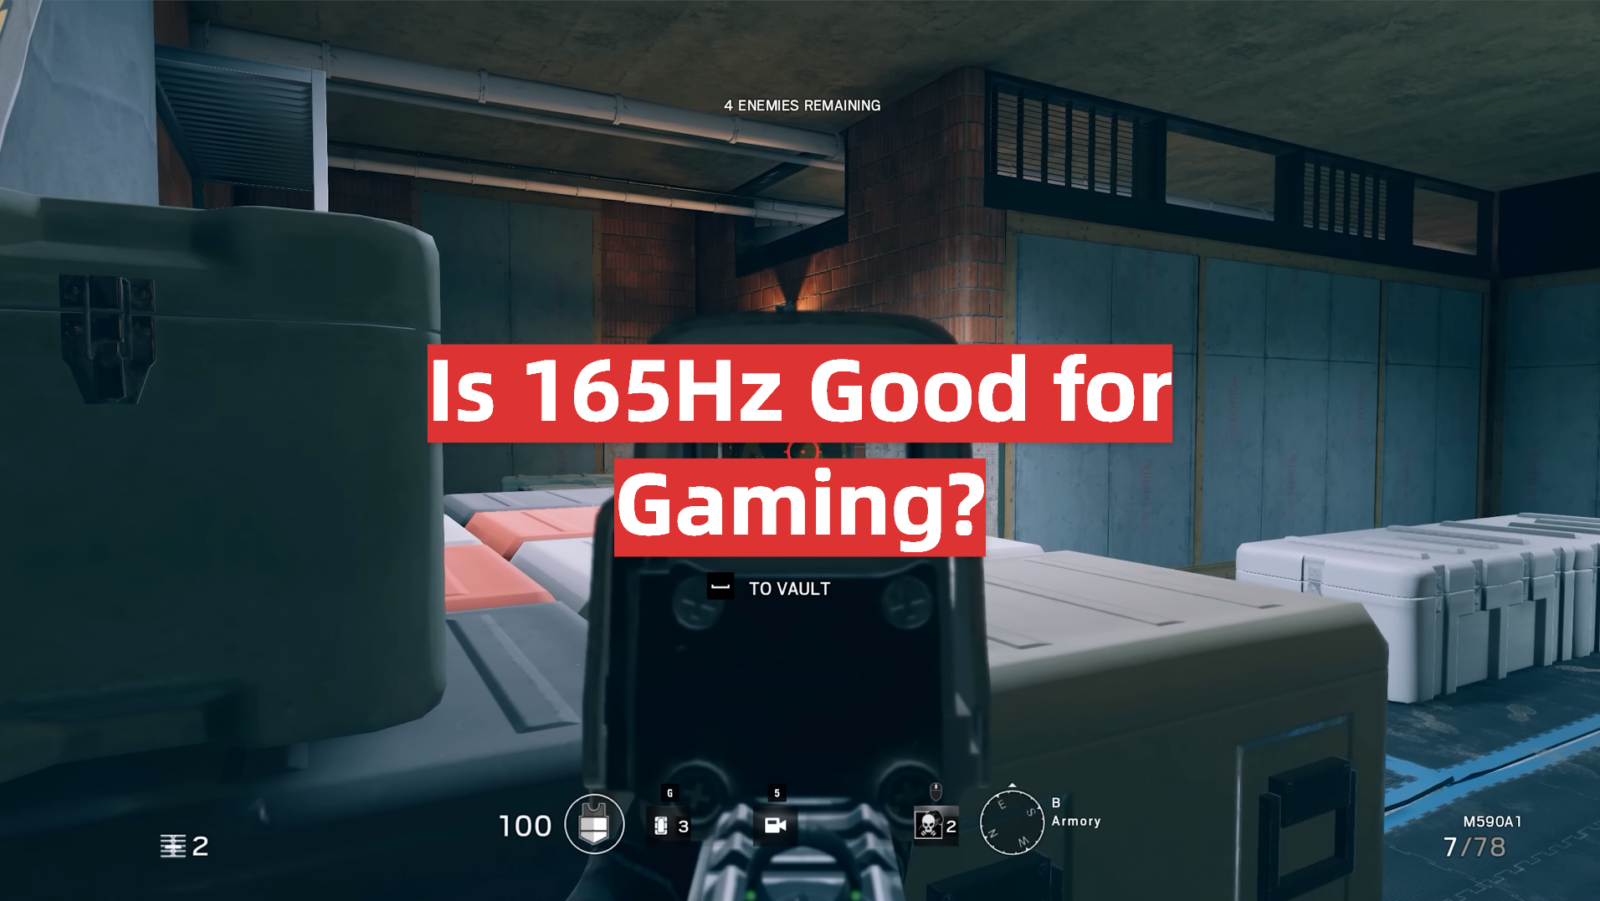 Is 165Hz Good for Gaming?